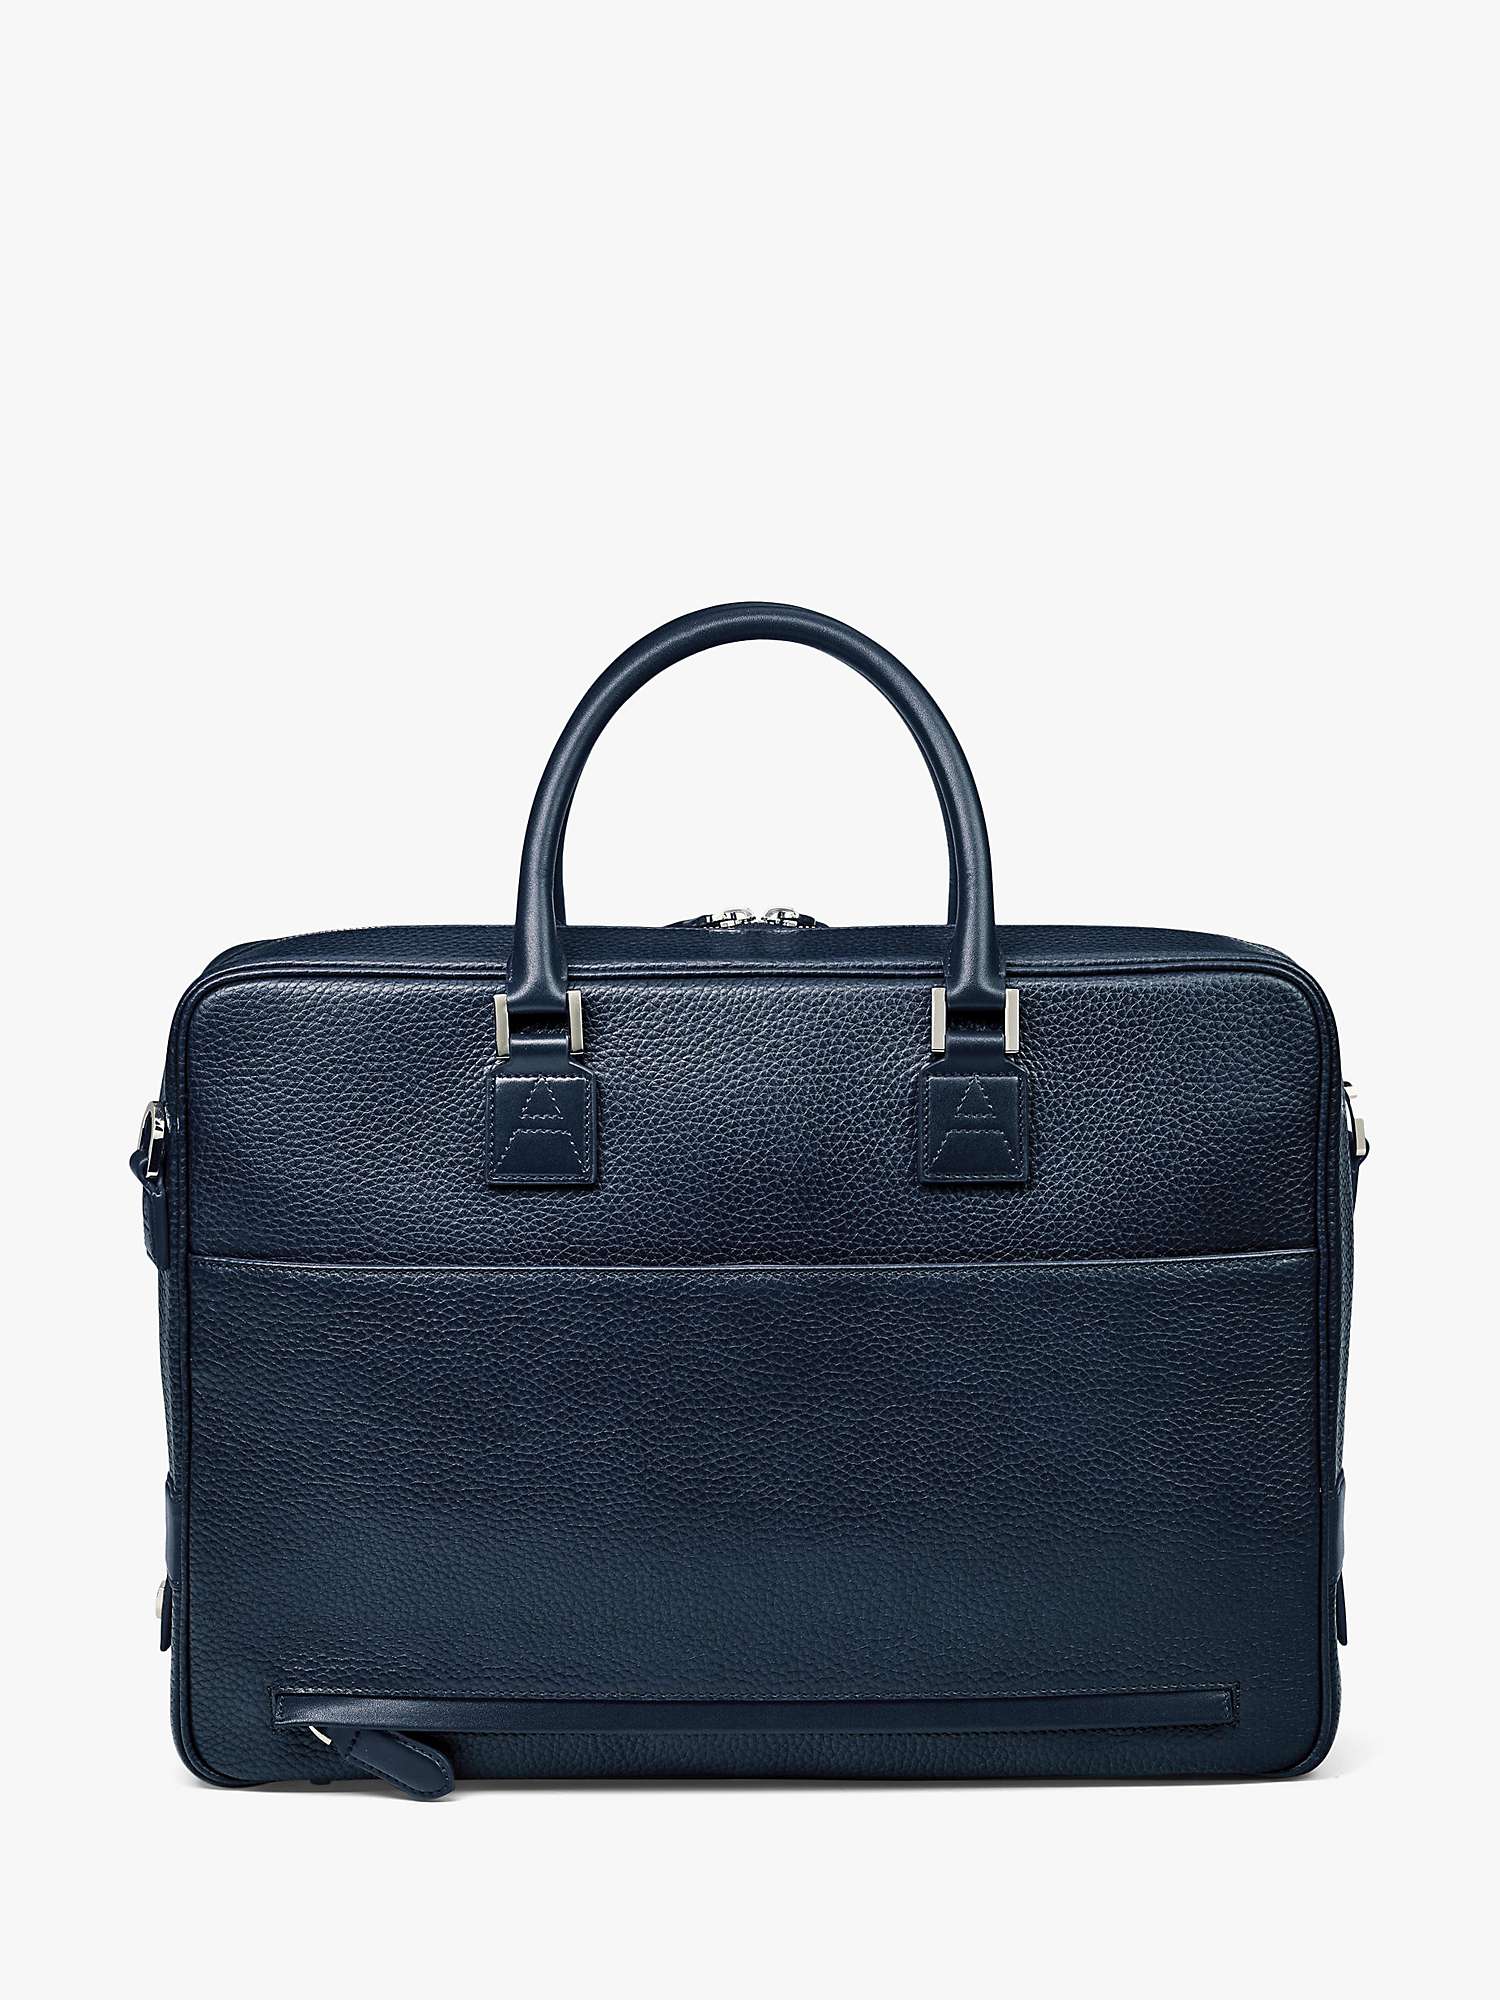 Buy Aspinal of London Mount Street Small Pebble Grain Leather Laptop Bag Online at johnlewis.com